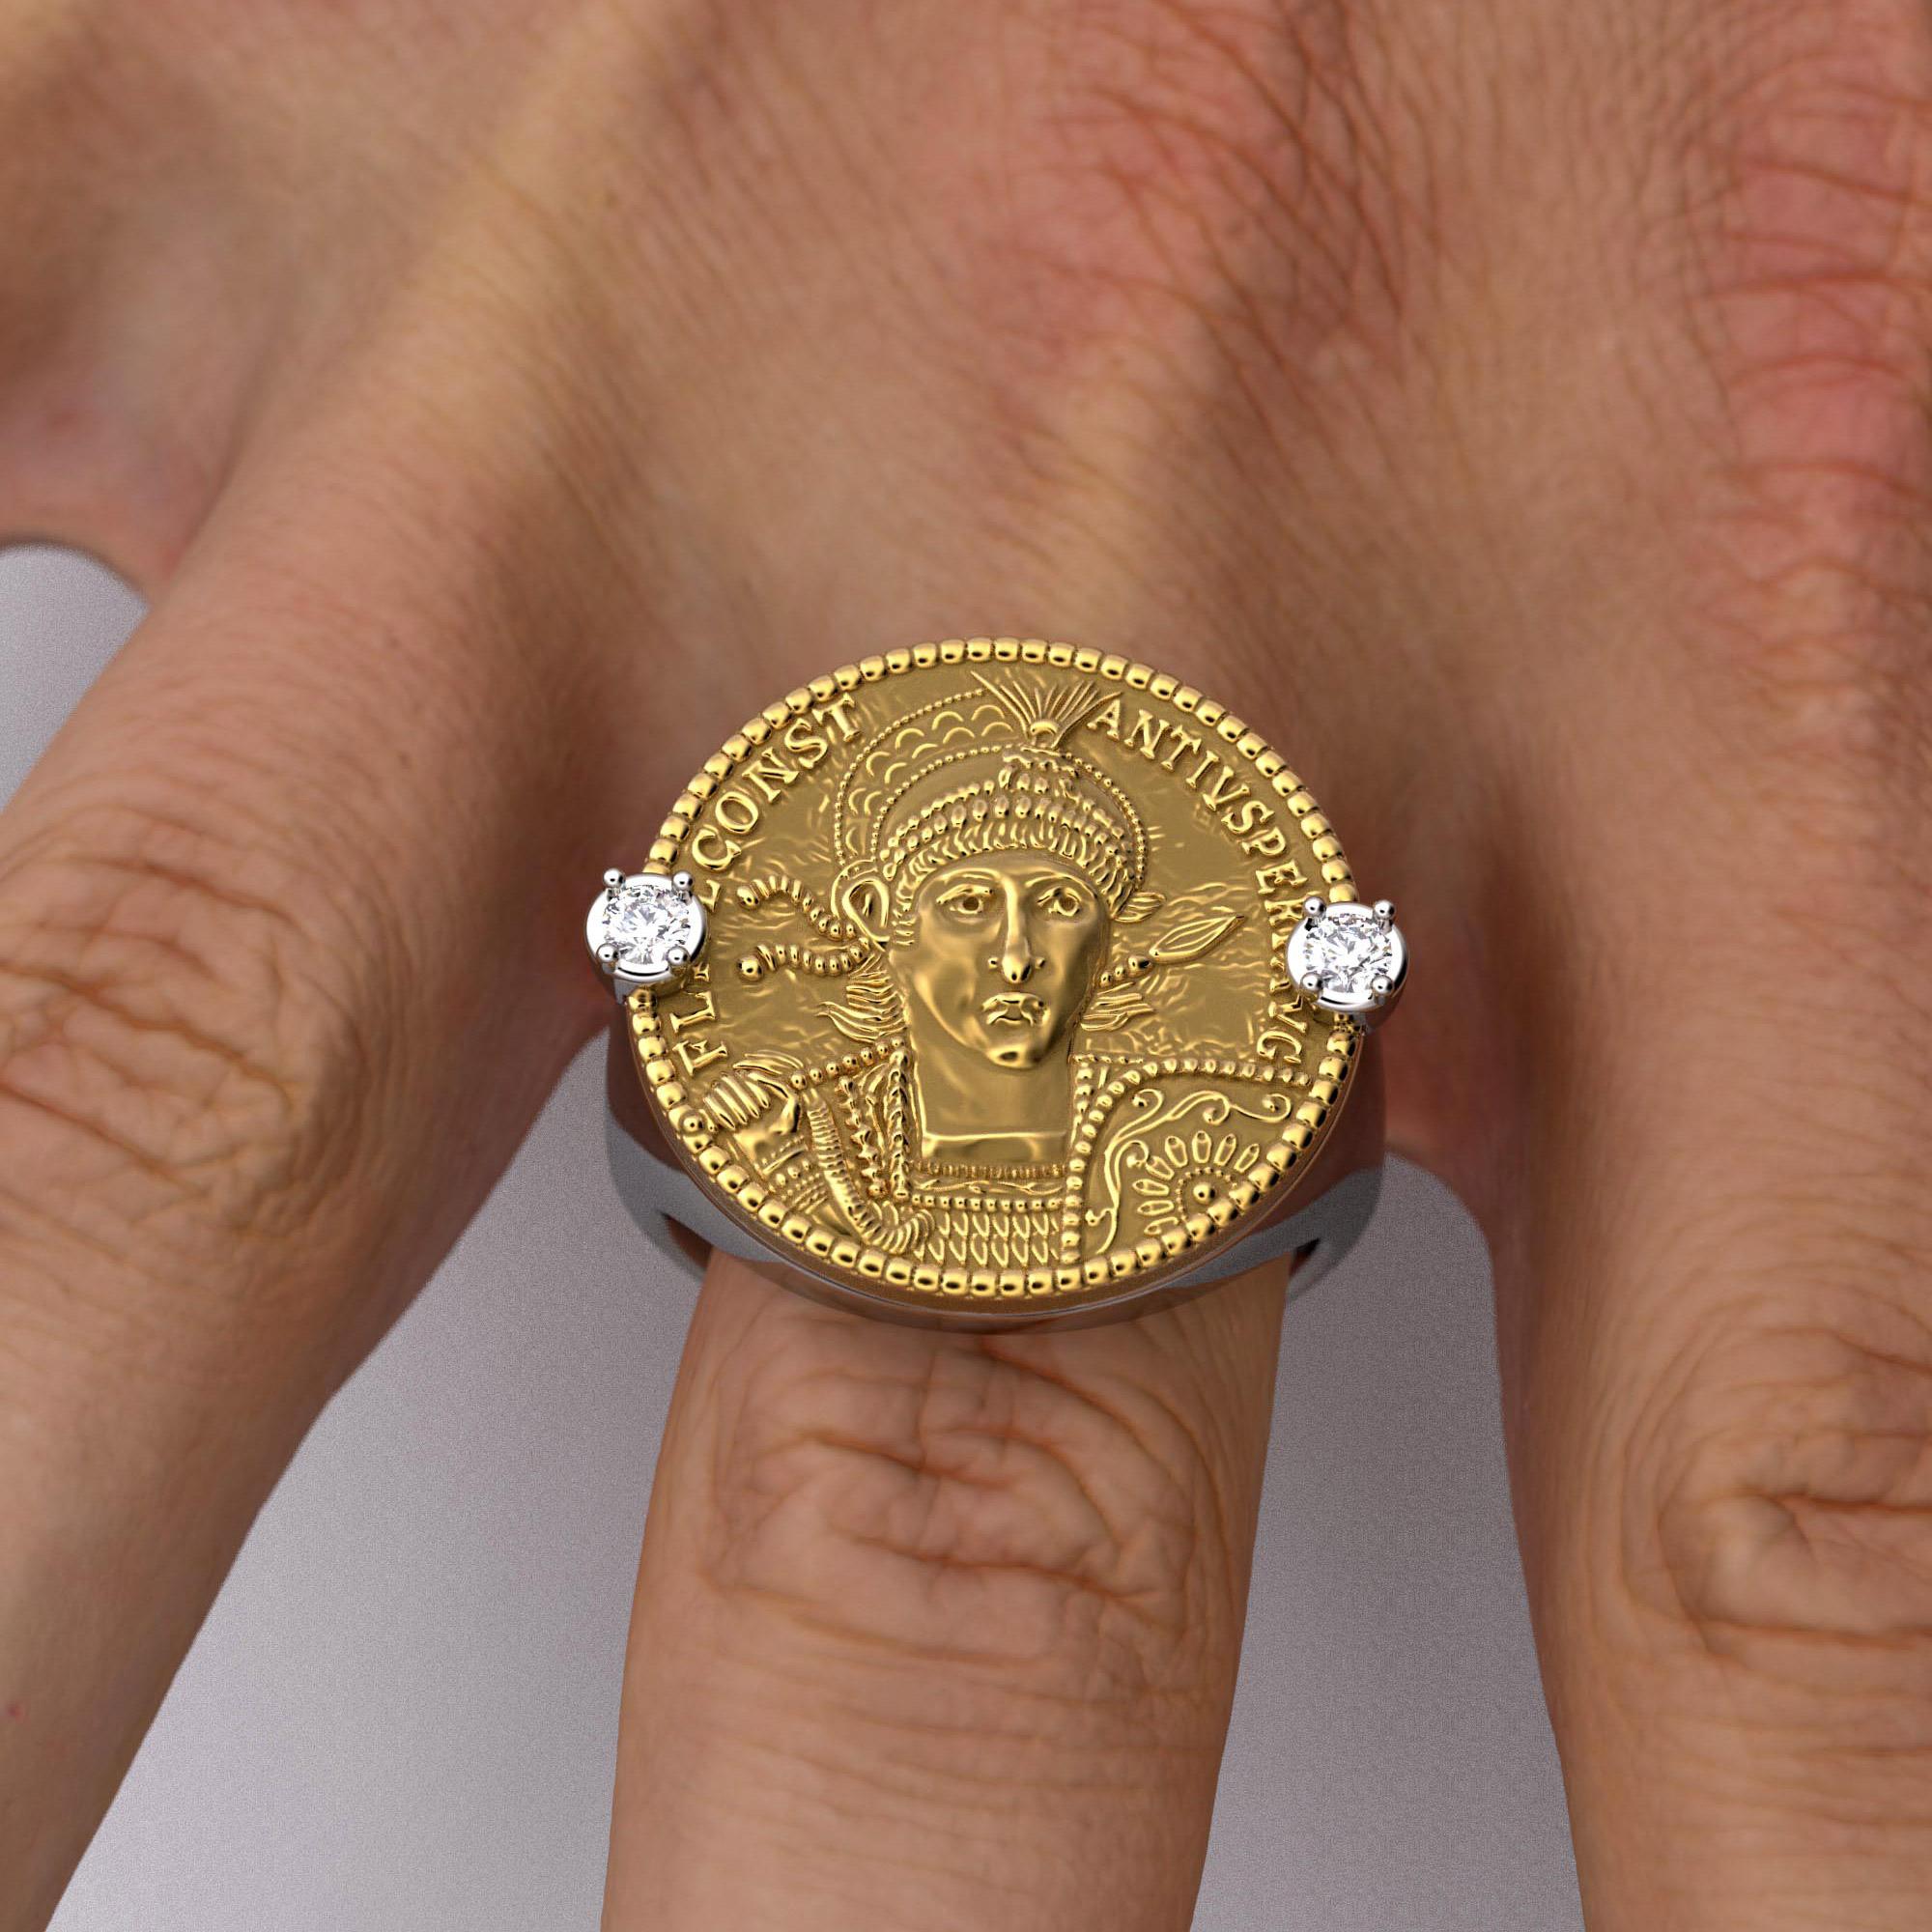 For Sale:  14k Ancient Roman Style Gold Coin Ring with a reproduction of a Roman Solidus 9